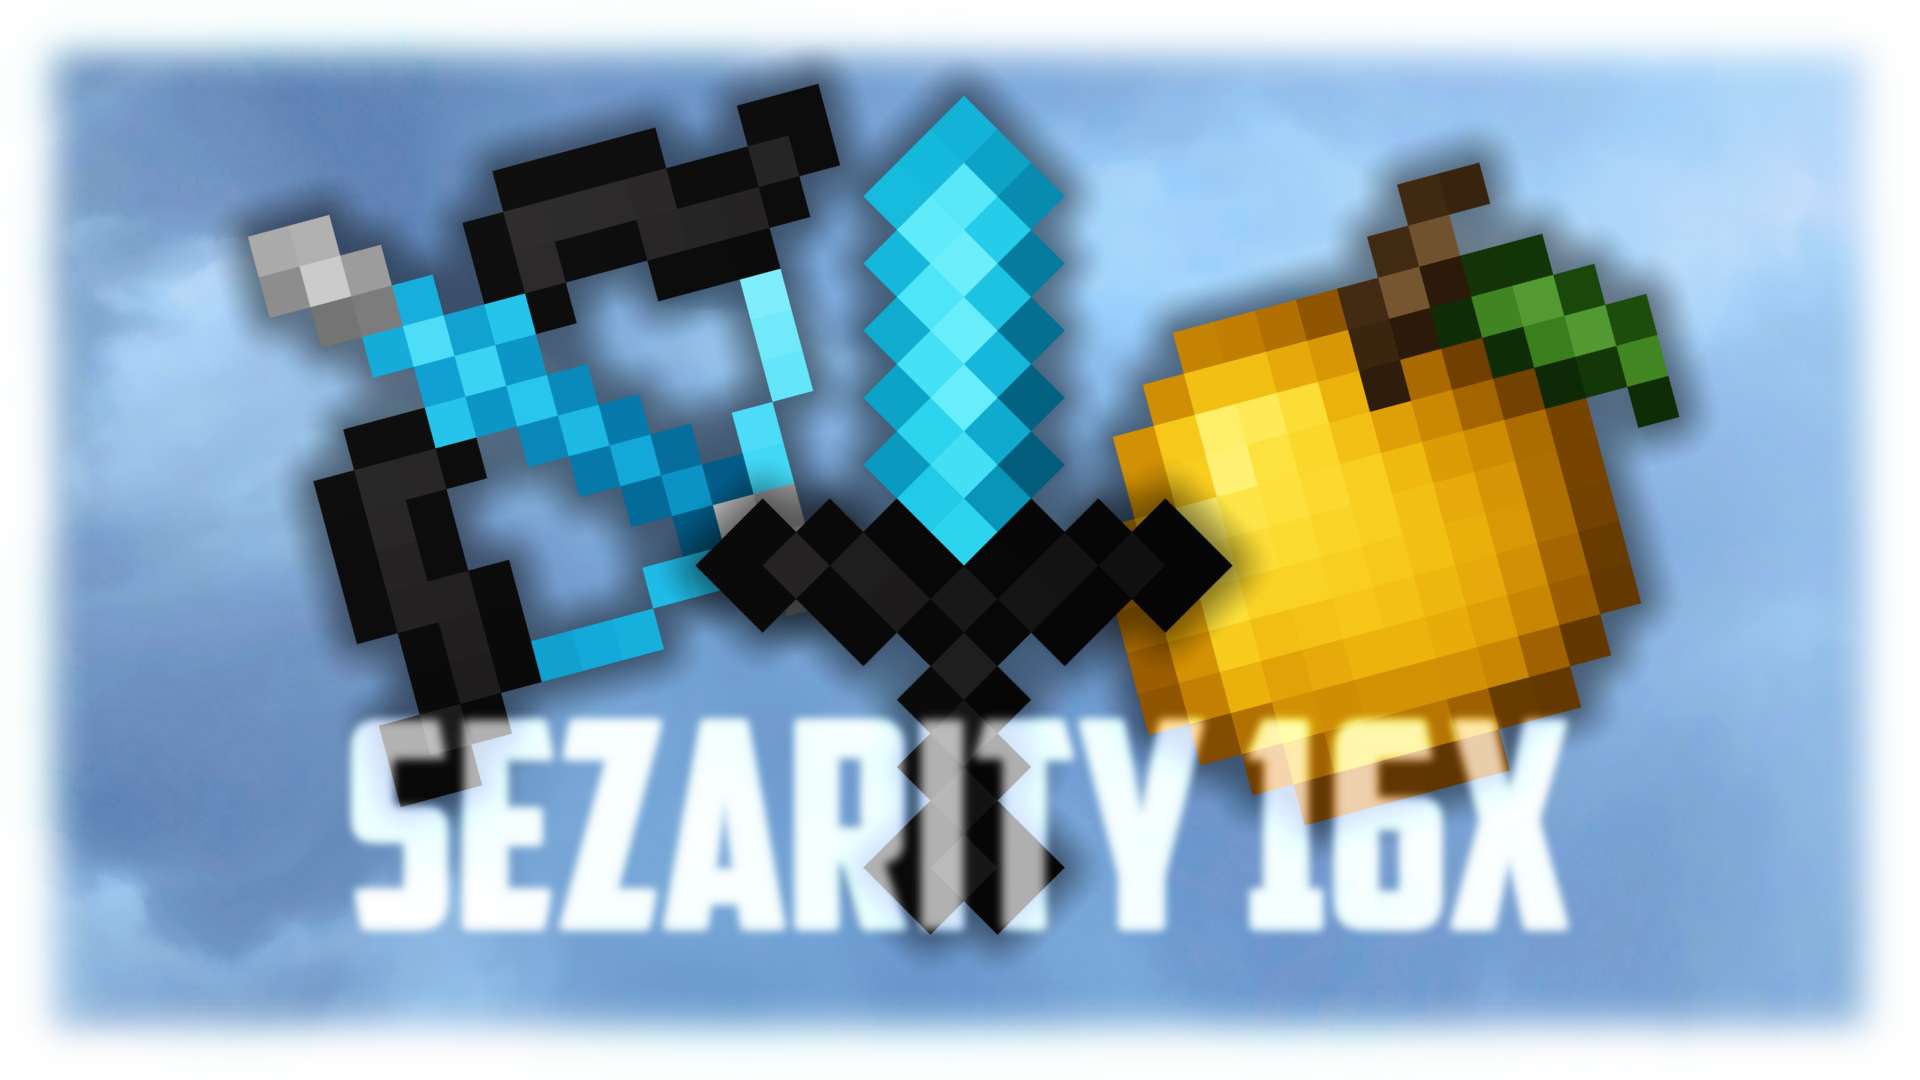 Sezarity 16x by Zlax on PvPRP